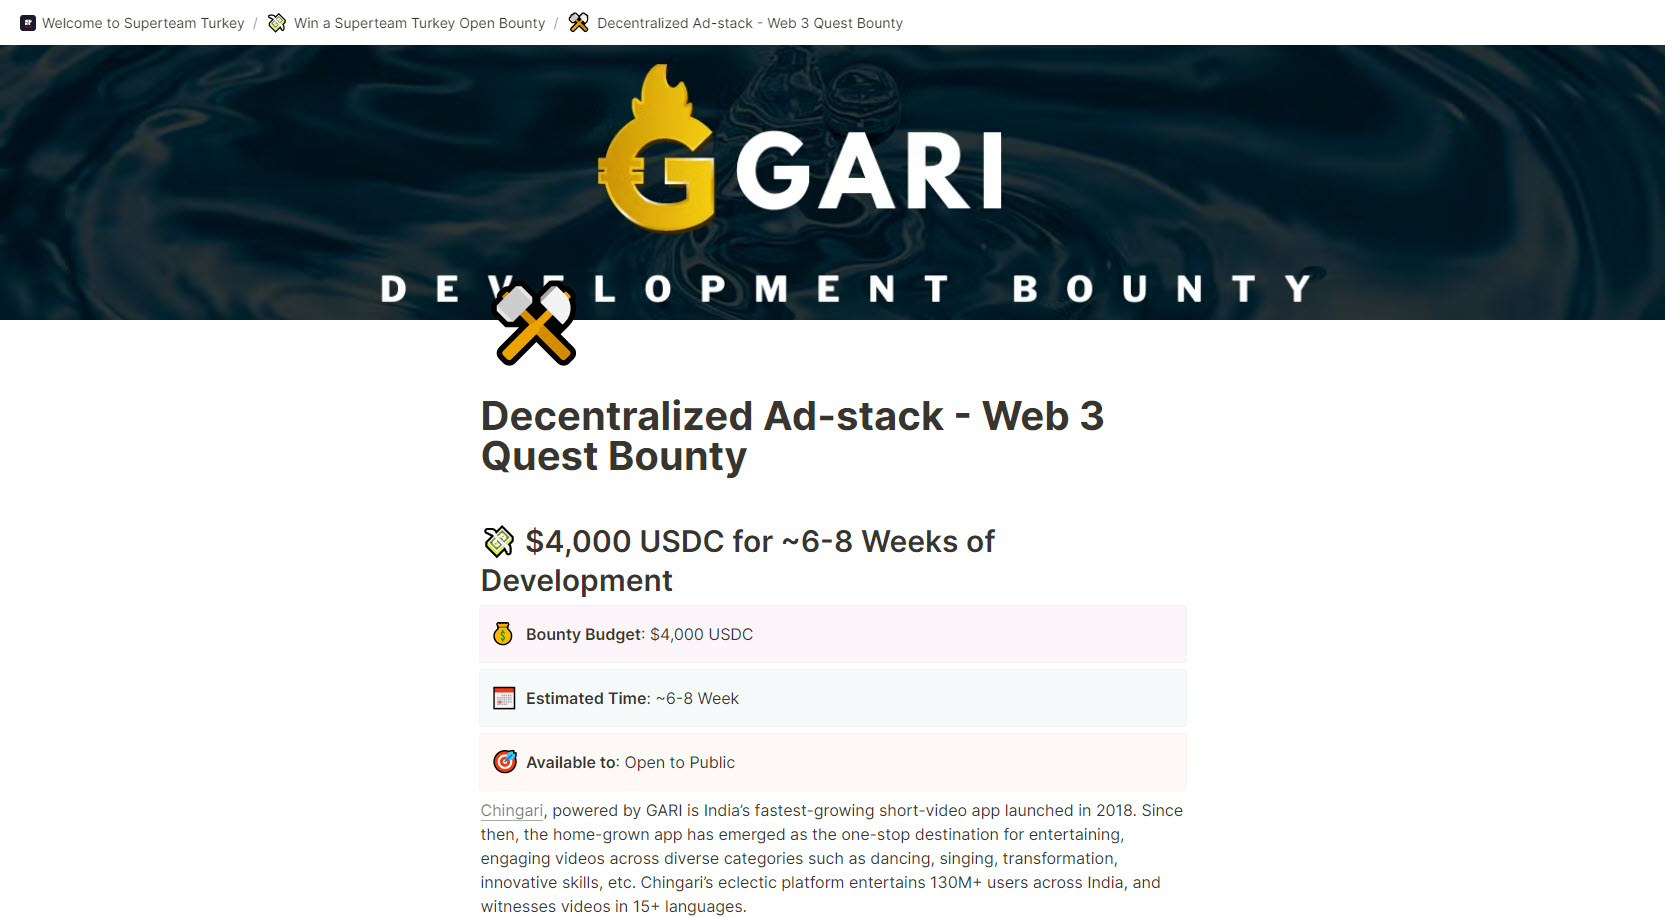 Decentralized Ad-stack - Web 3 Quest Bounty